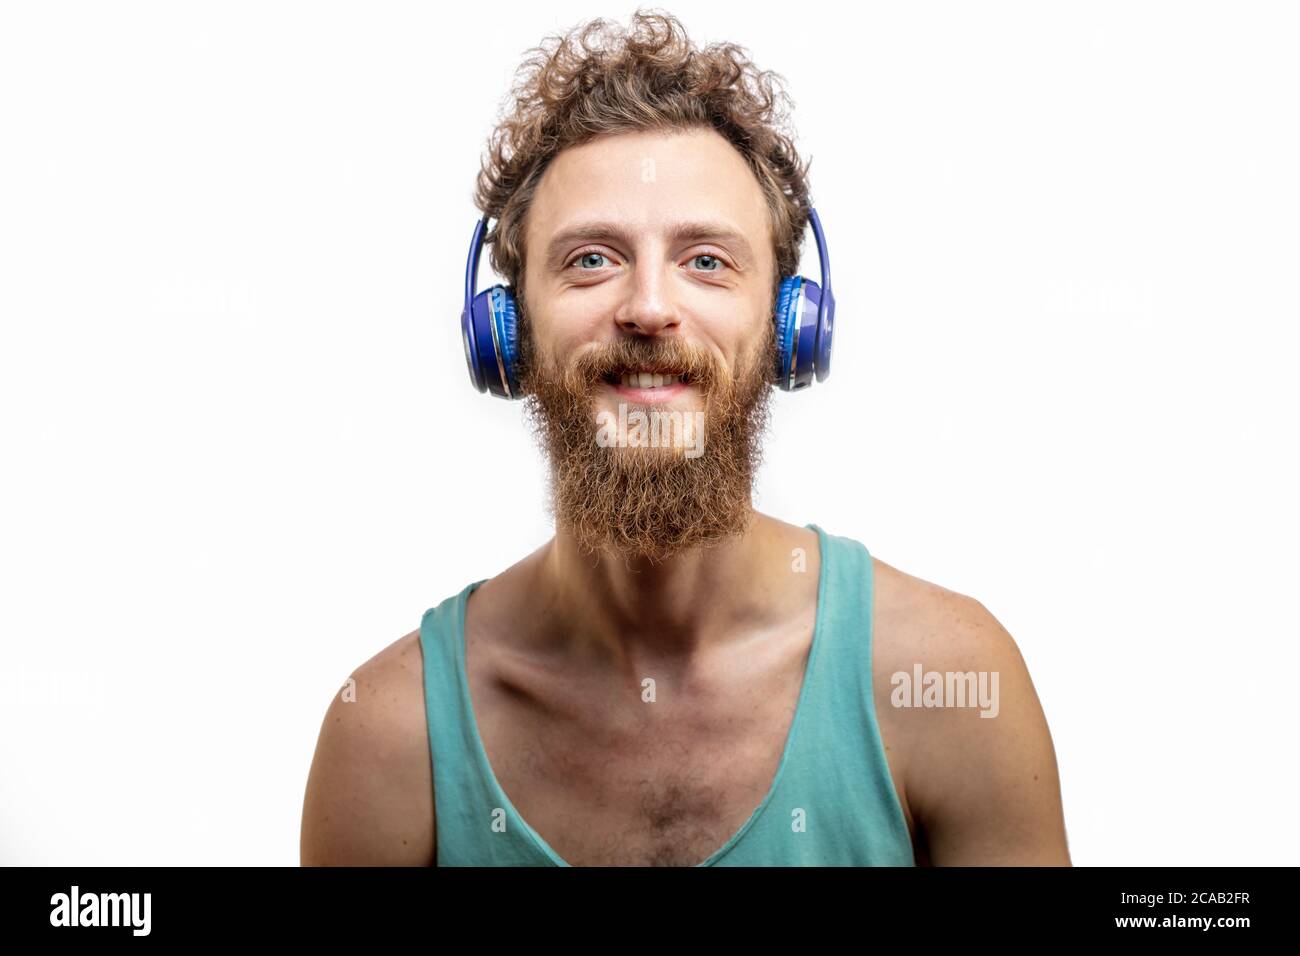 Portrait of young handsome softie, good-looking kind hipster man with headphones smiling and looking at camera over white background with copyspace. Stock Photo